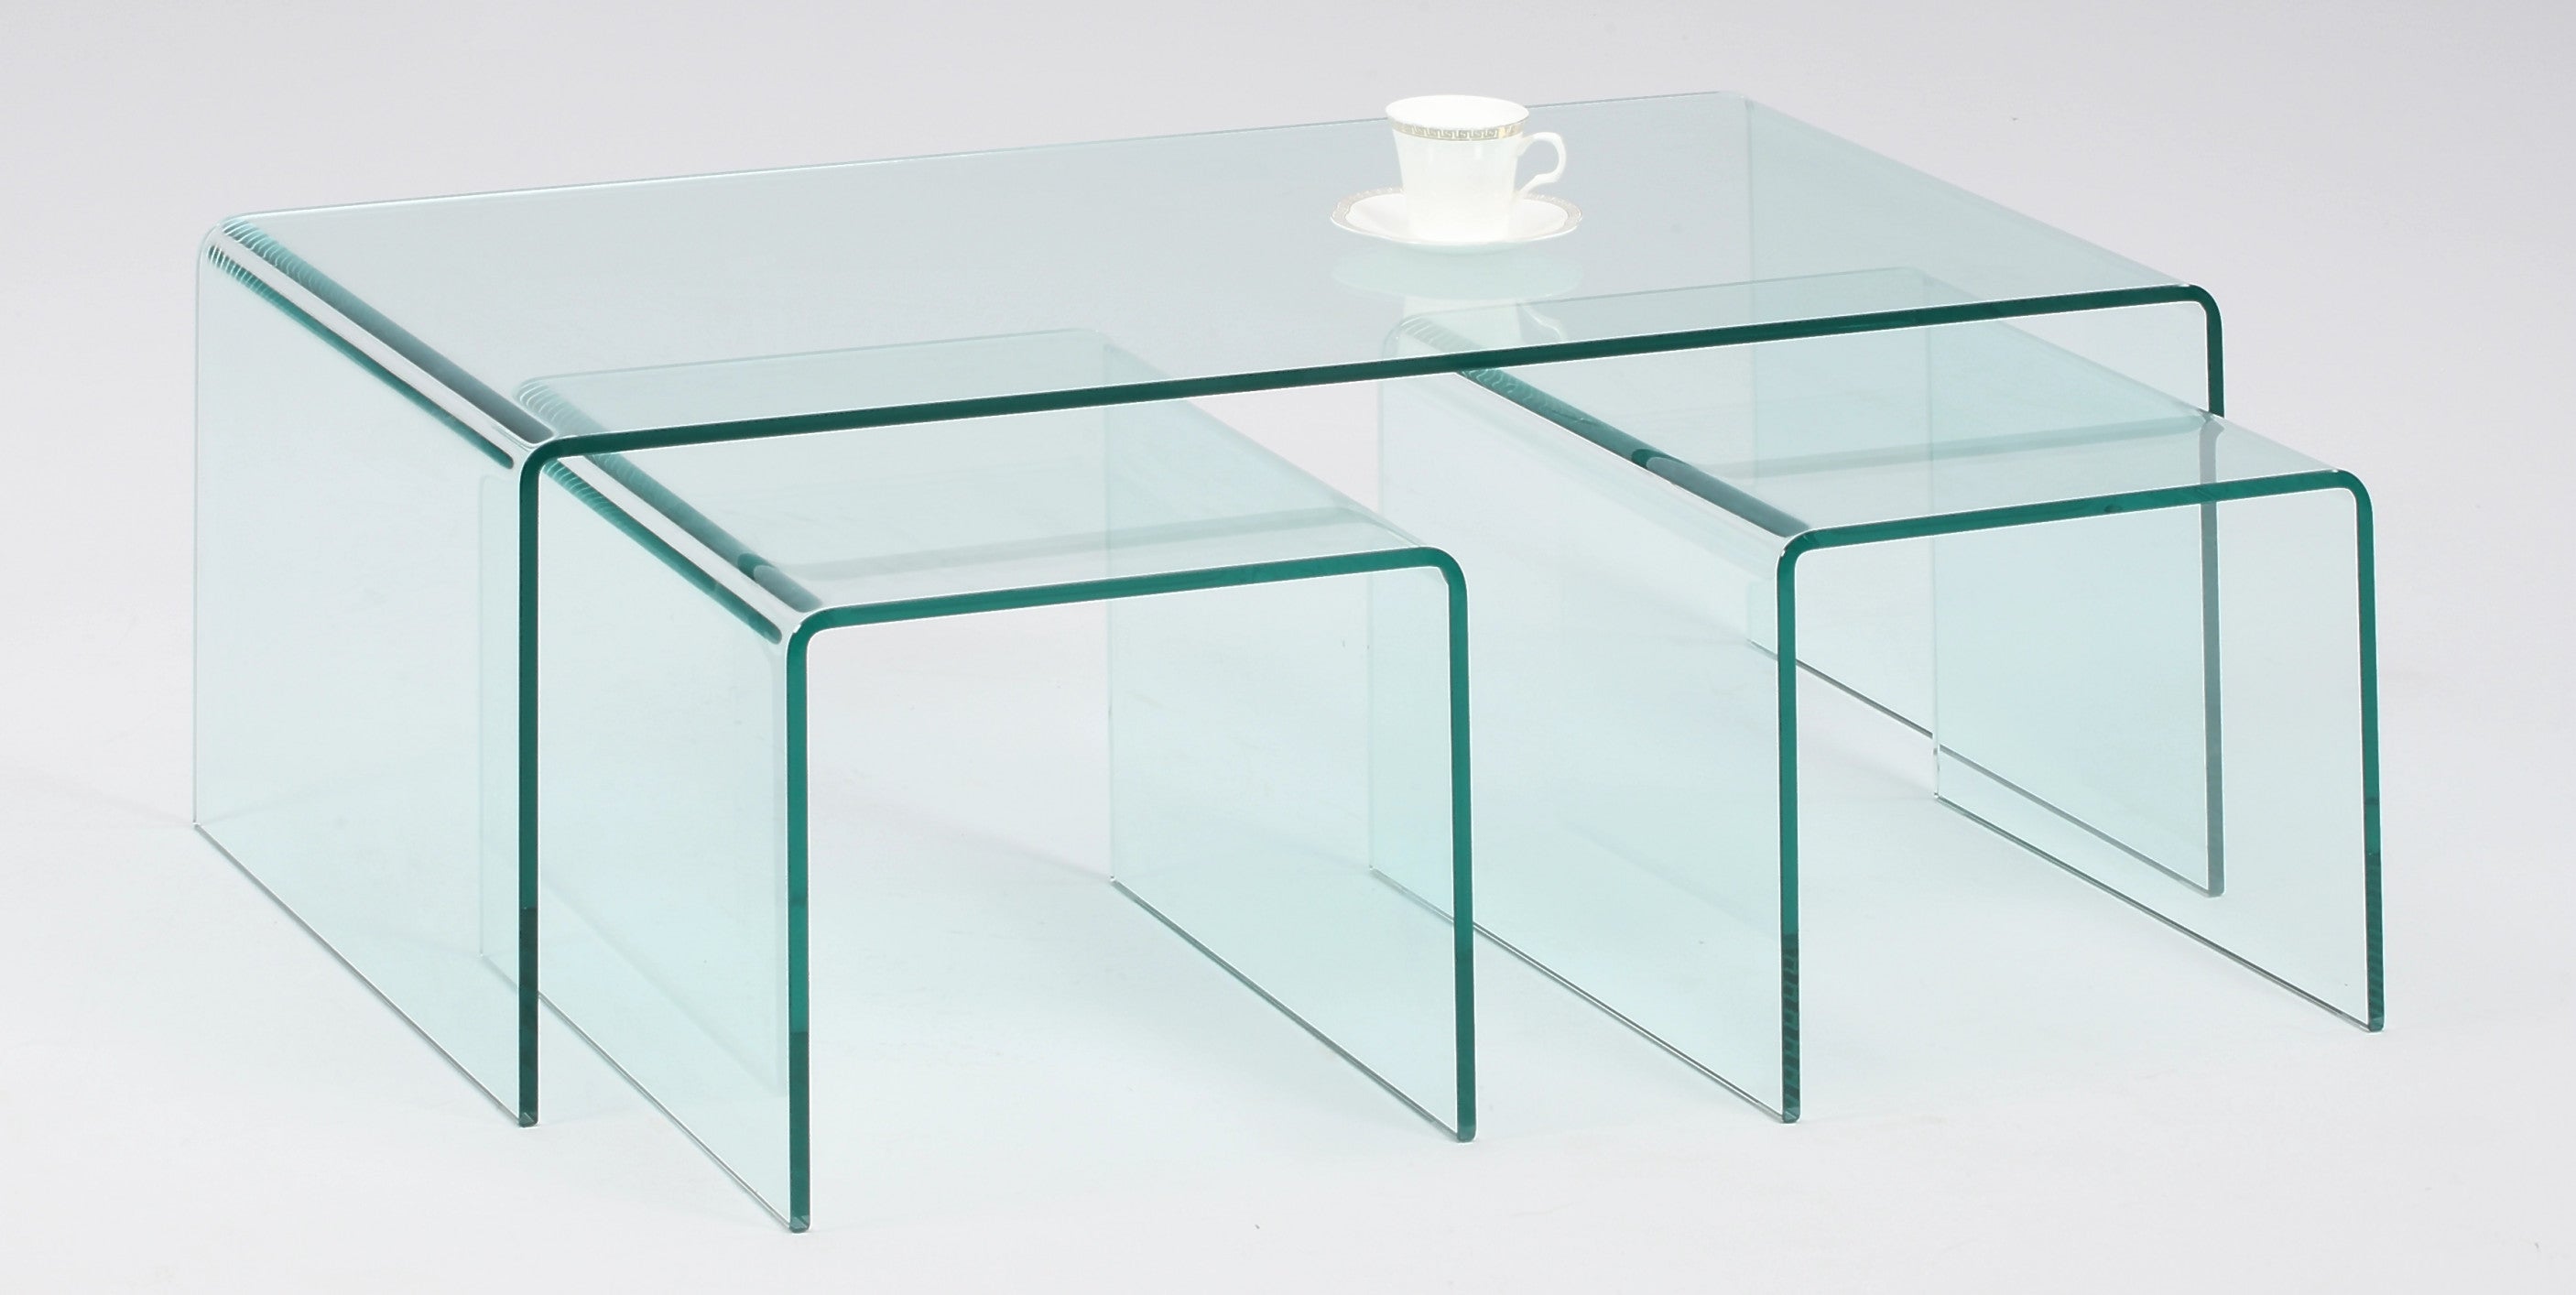 Chintaly 6022-ct Nested Bent Glass Cocktail Table - 3 Table Set